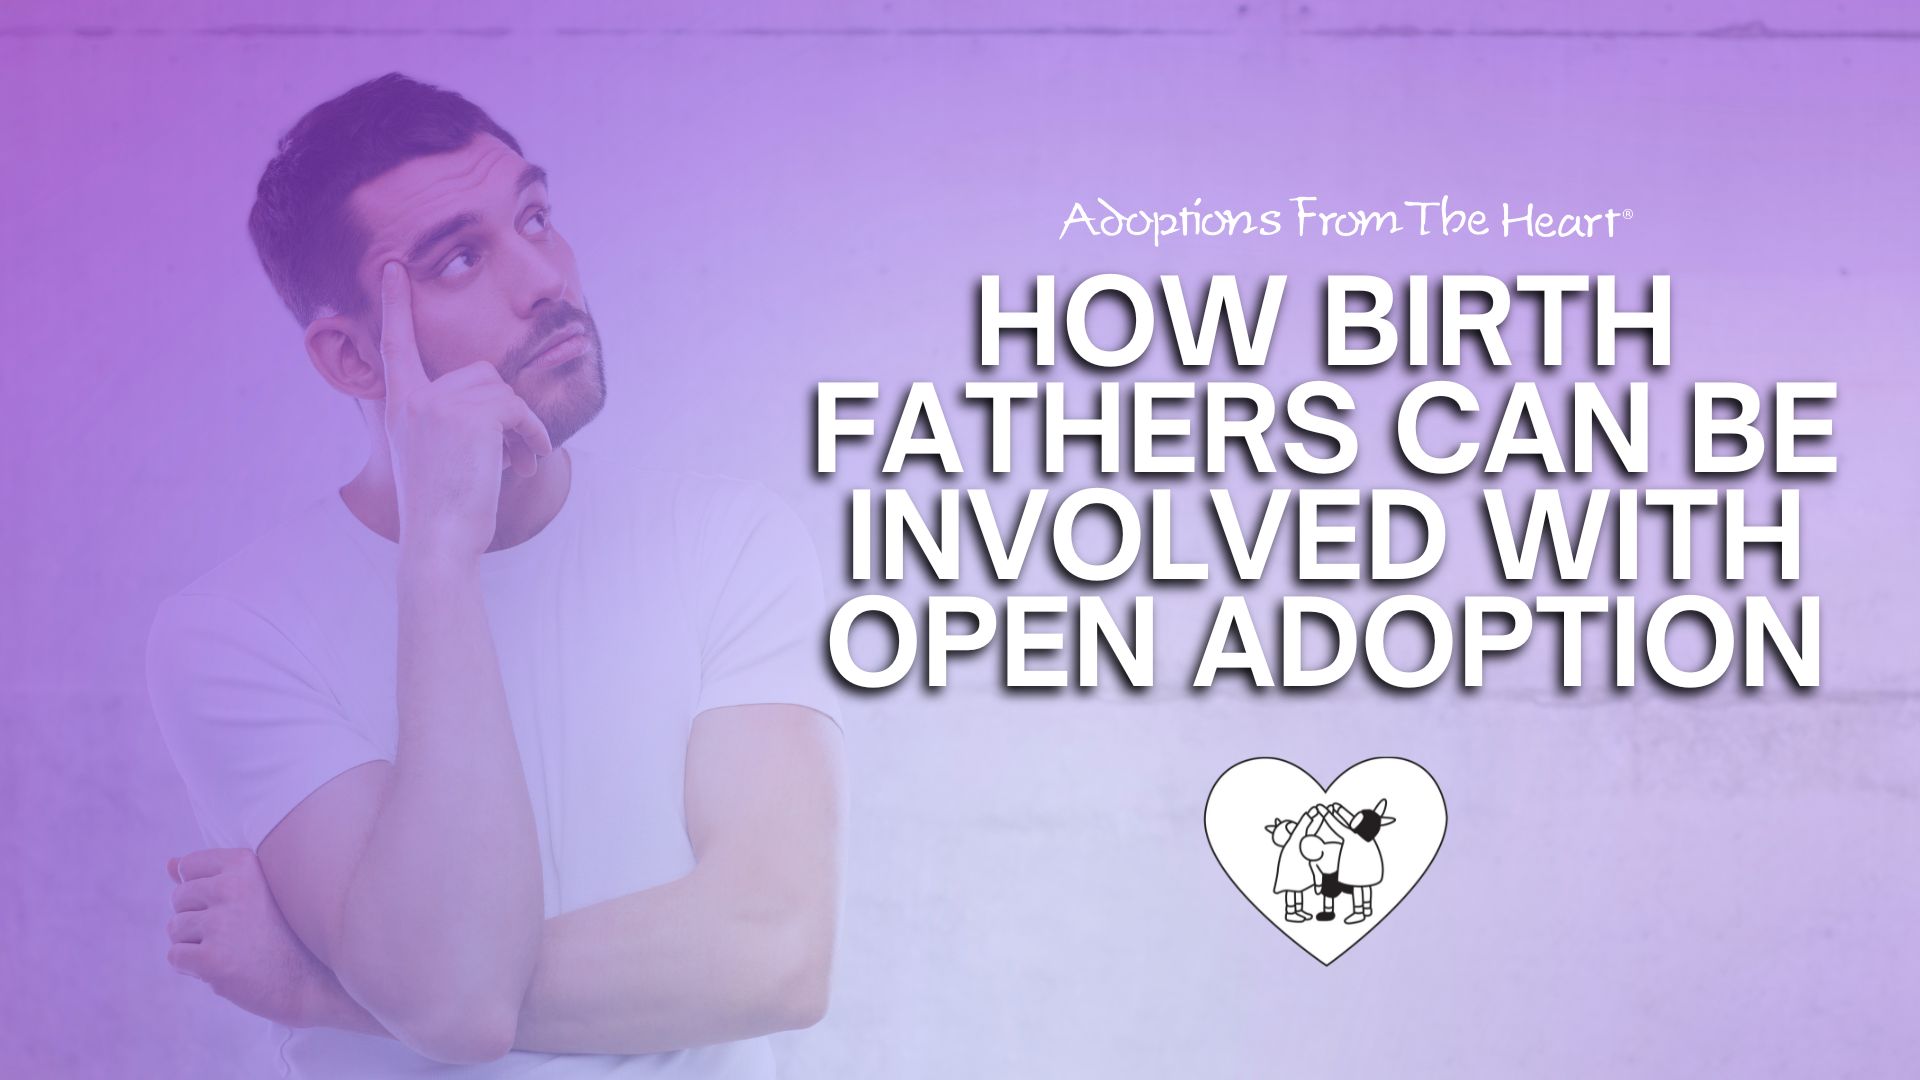 How Birth Fathers Can Be Involved with Open Adoption